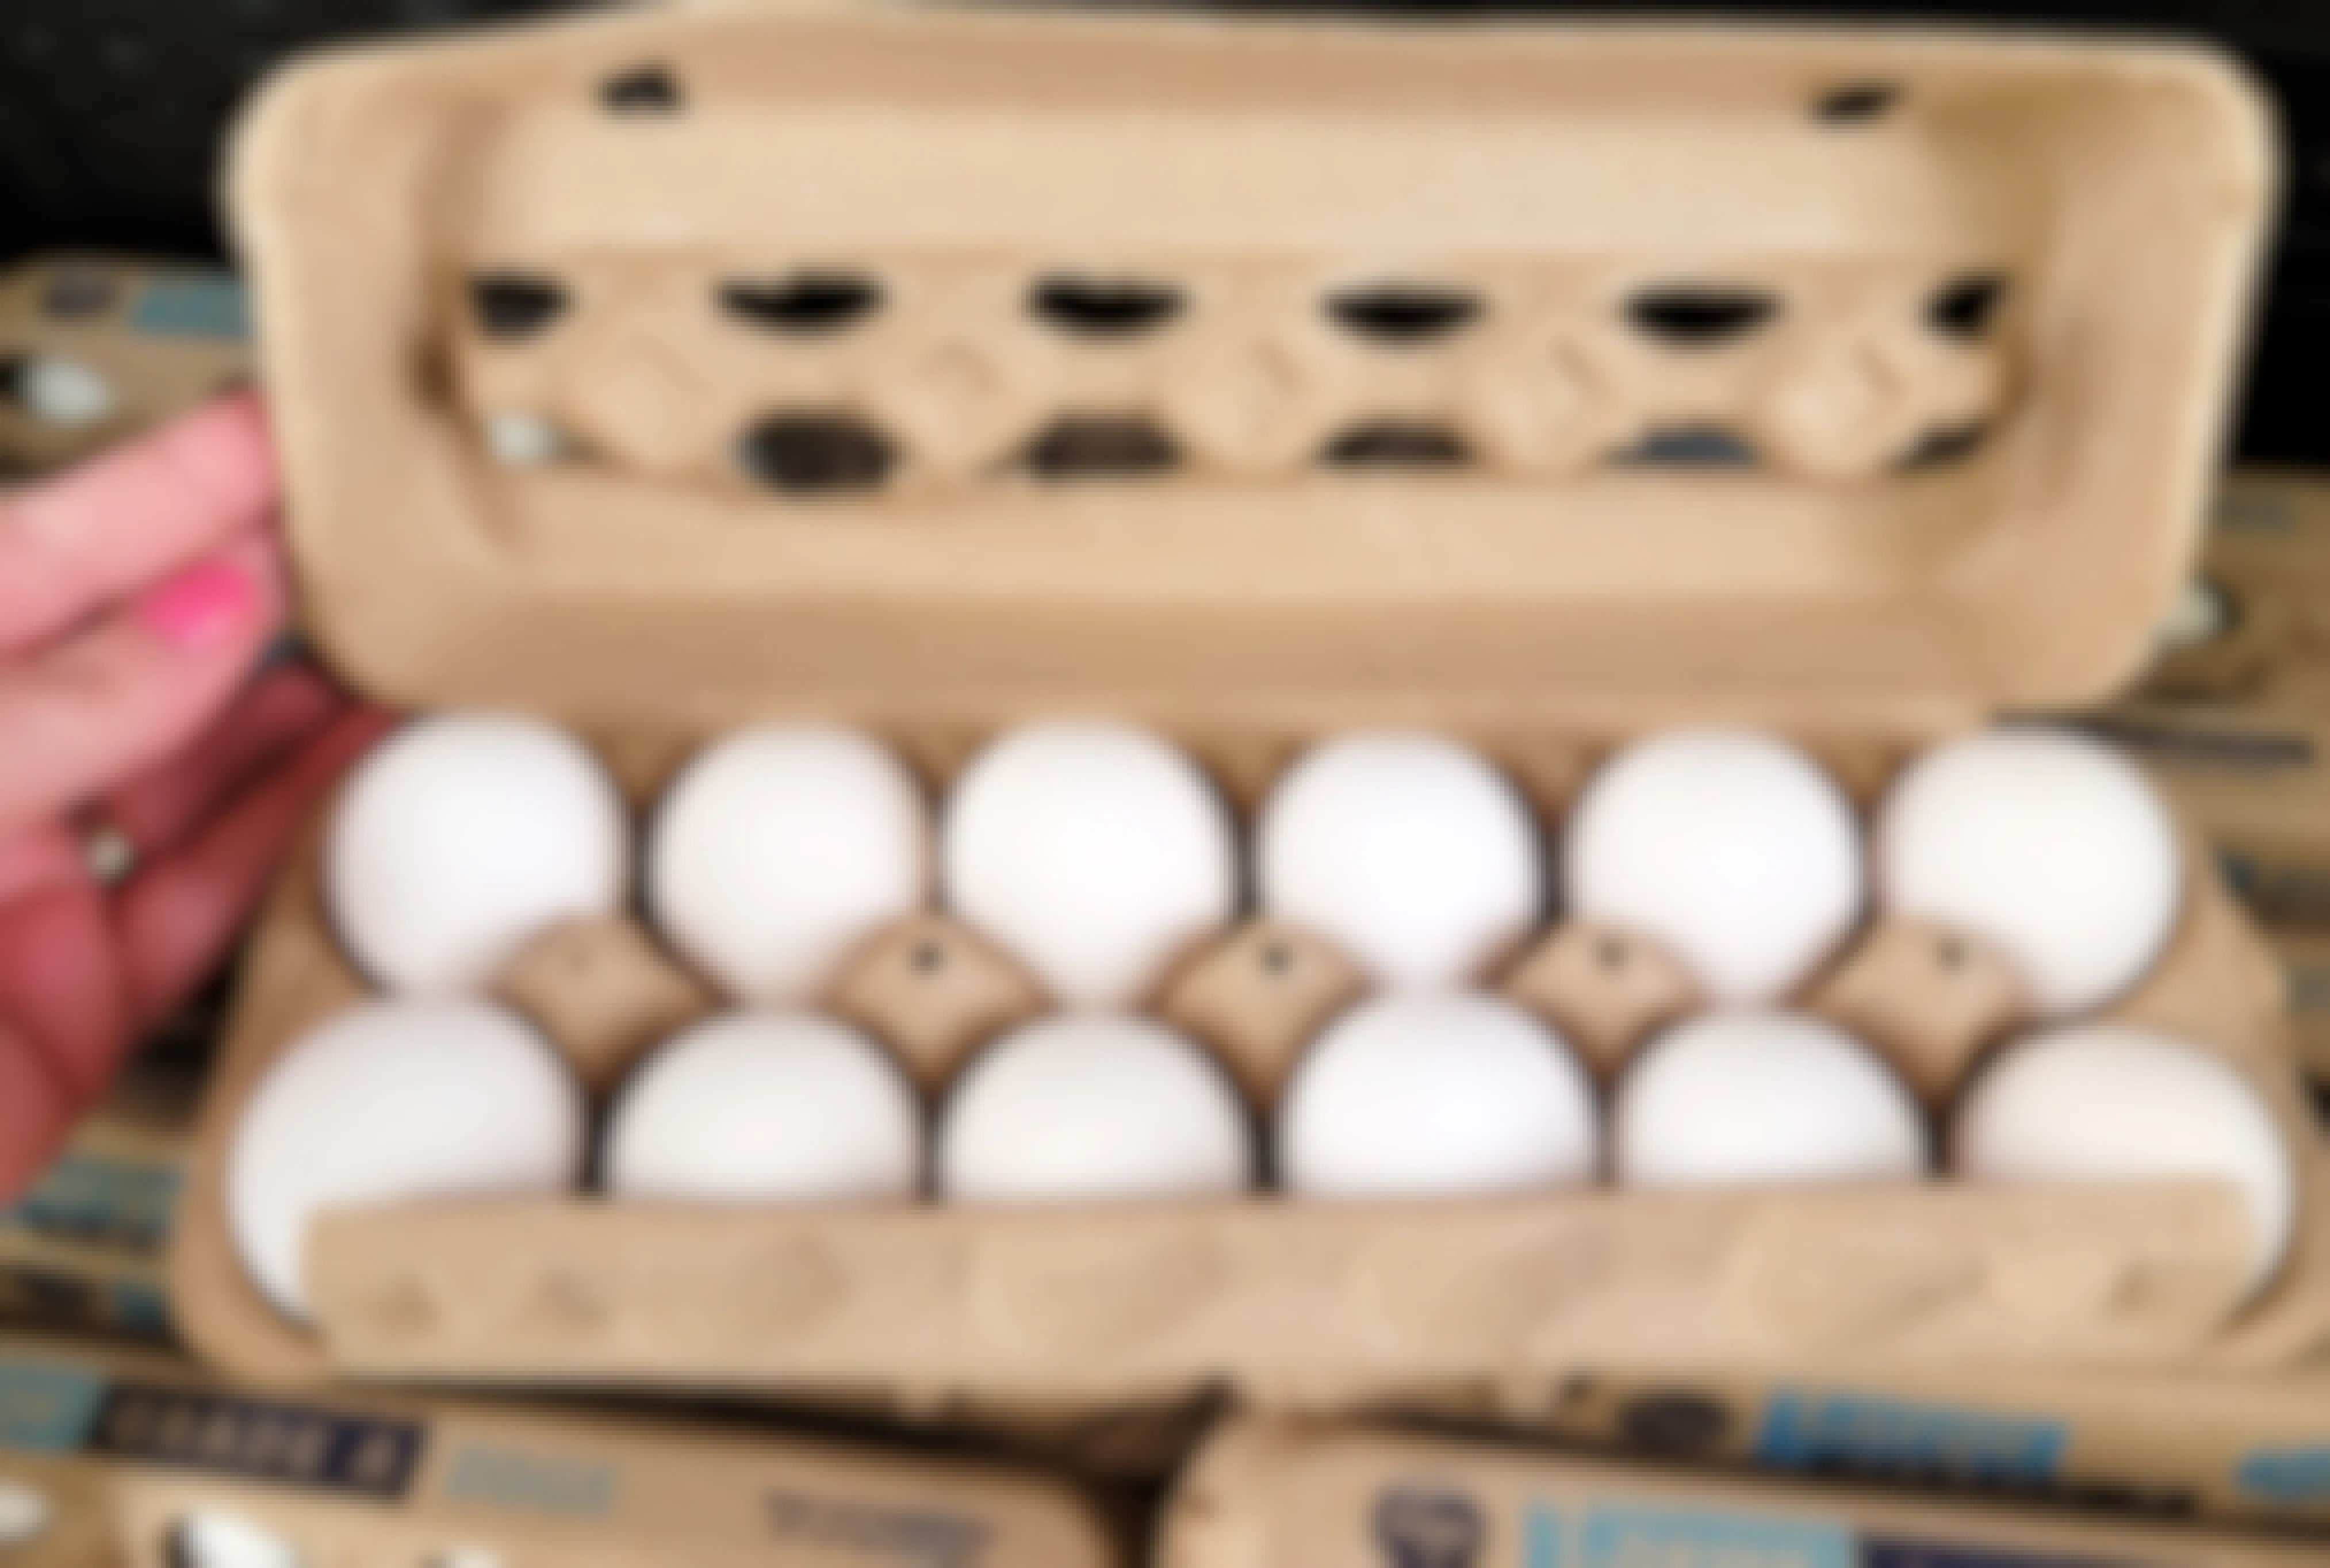 persons hand holding open a carton of a dozen eggs in a store